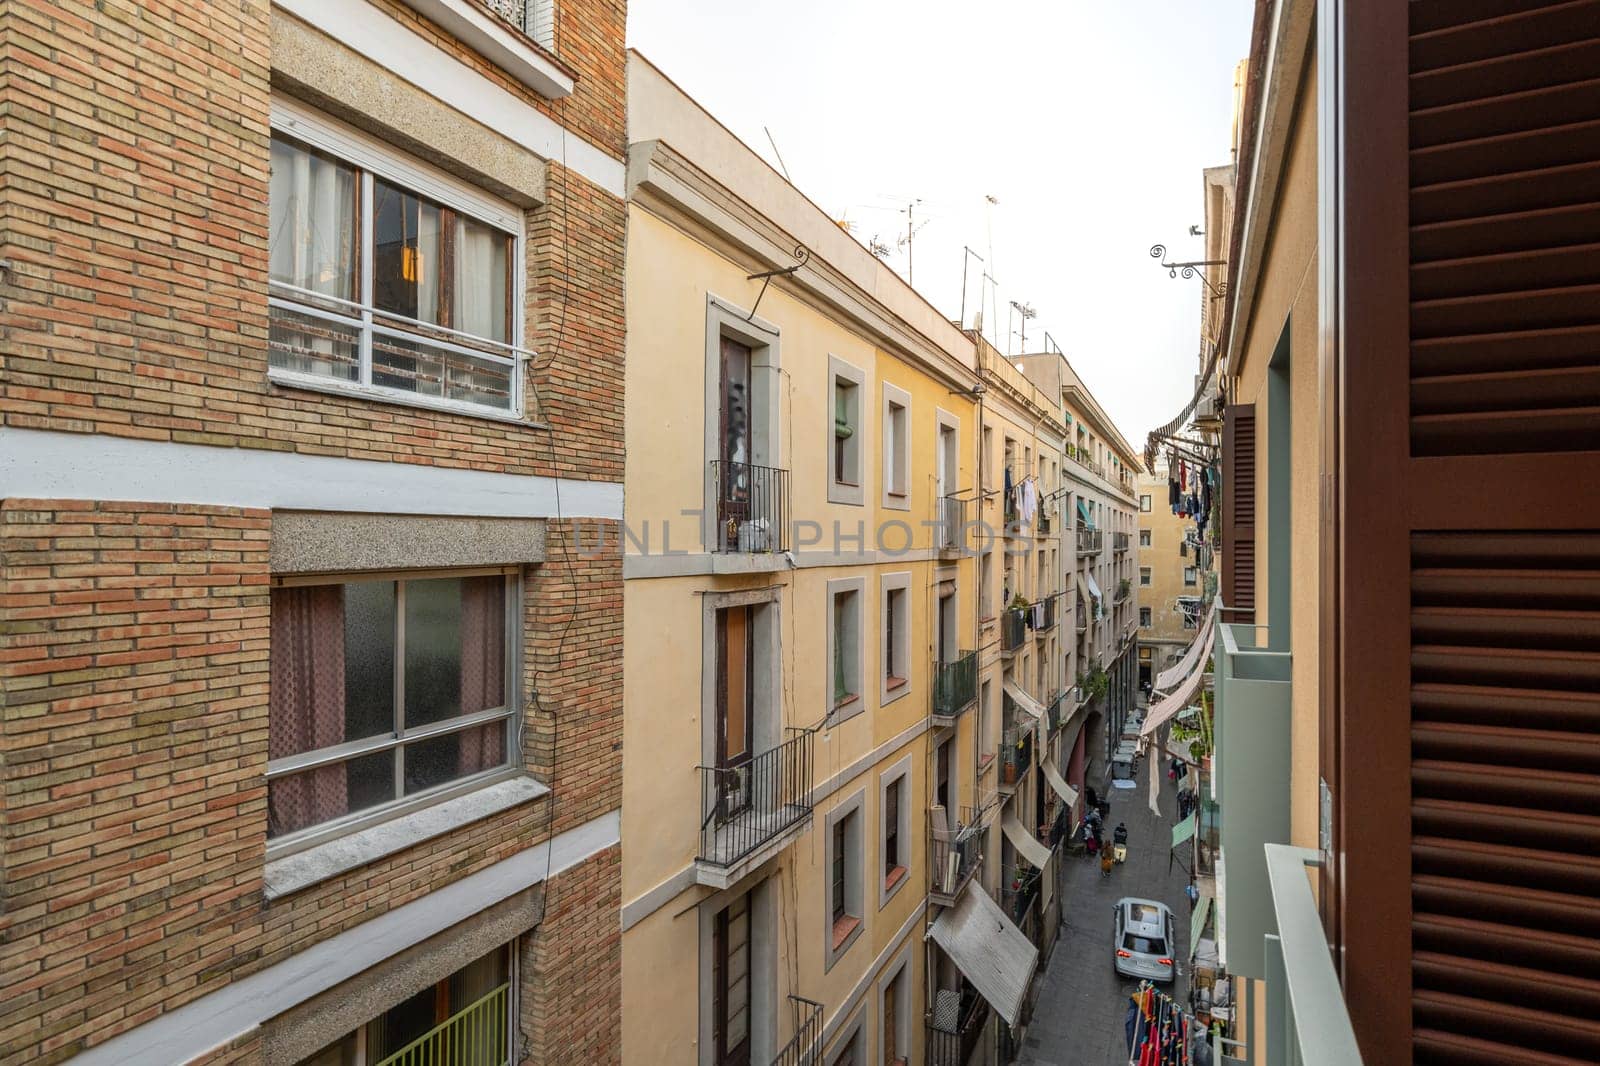 View from the balcony to a narrow Barcelona street among modern brick houses with large windows. The concept of modern European architecture by apavlin